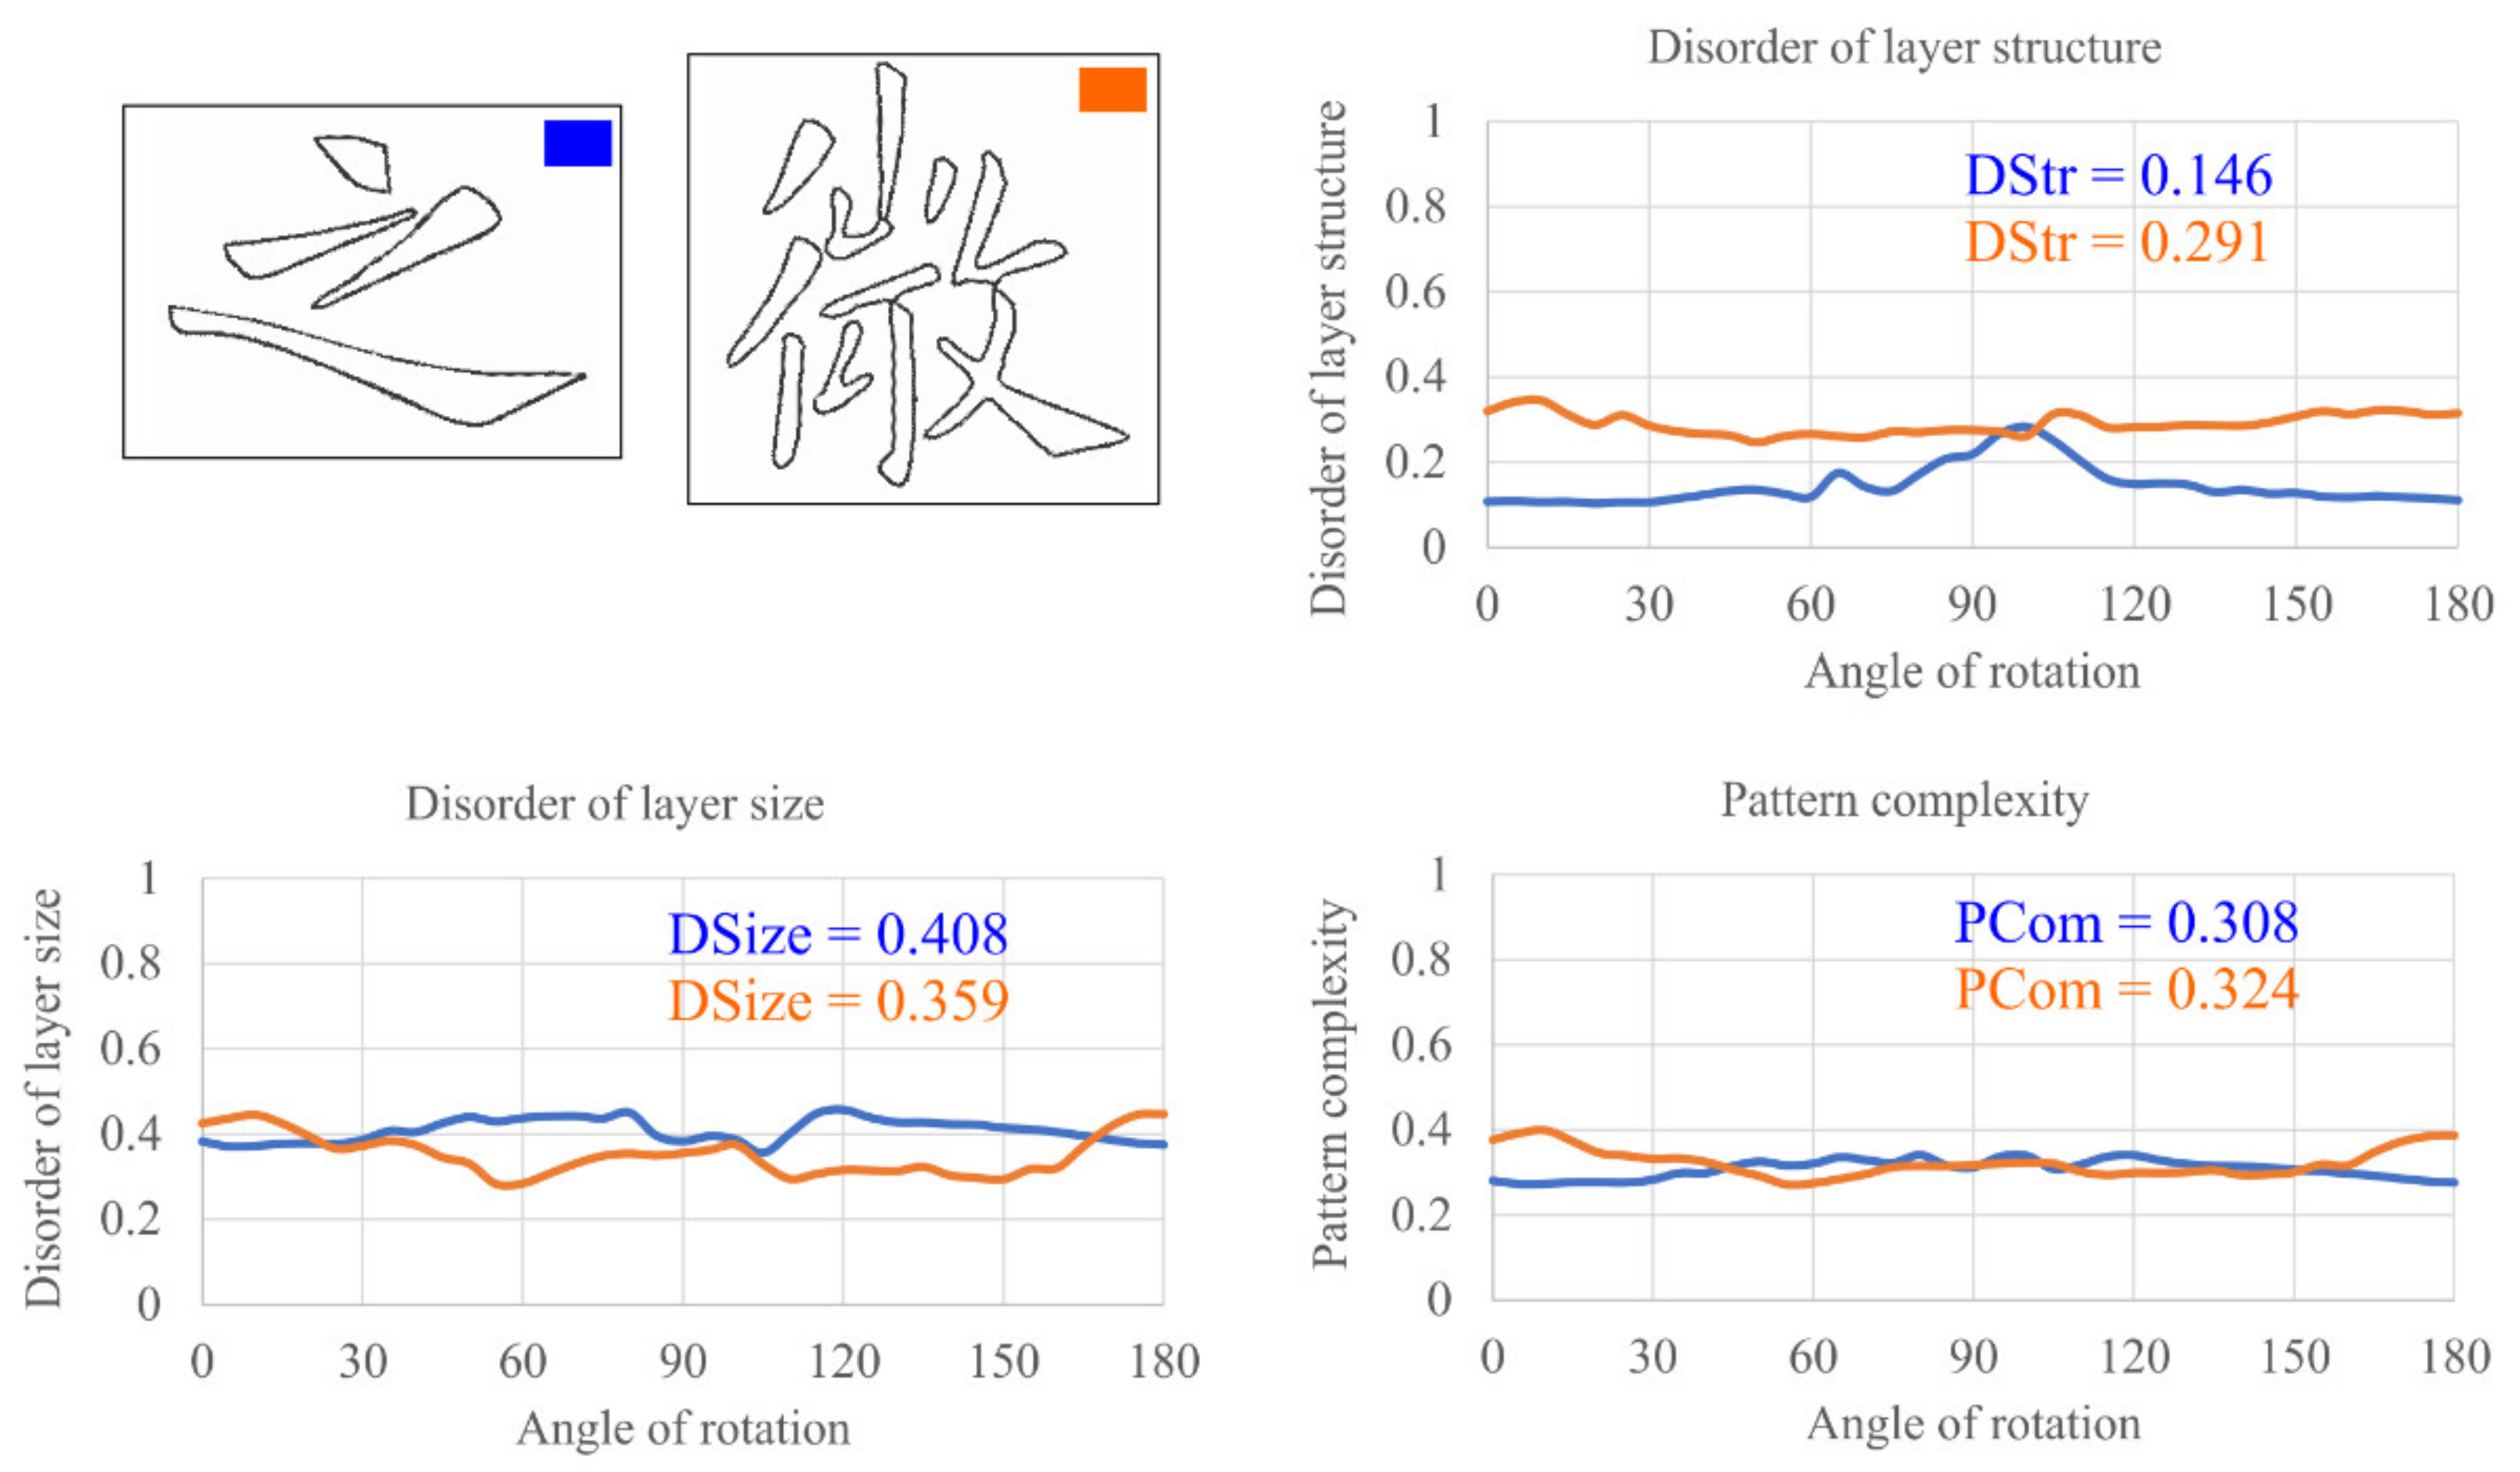 Intuition behind using Chinese glyphs. Figure copied from Wikipedia.